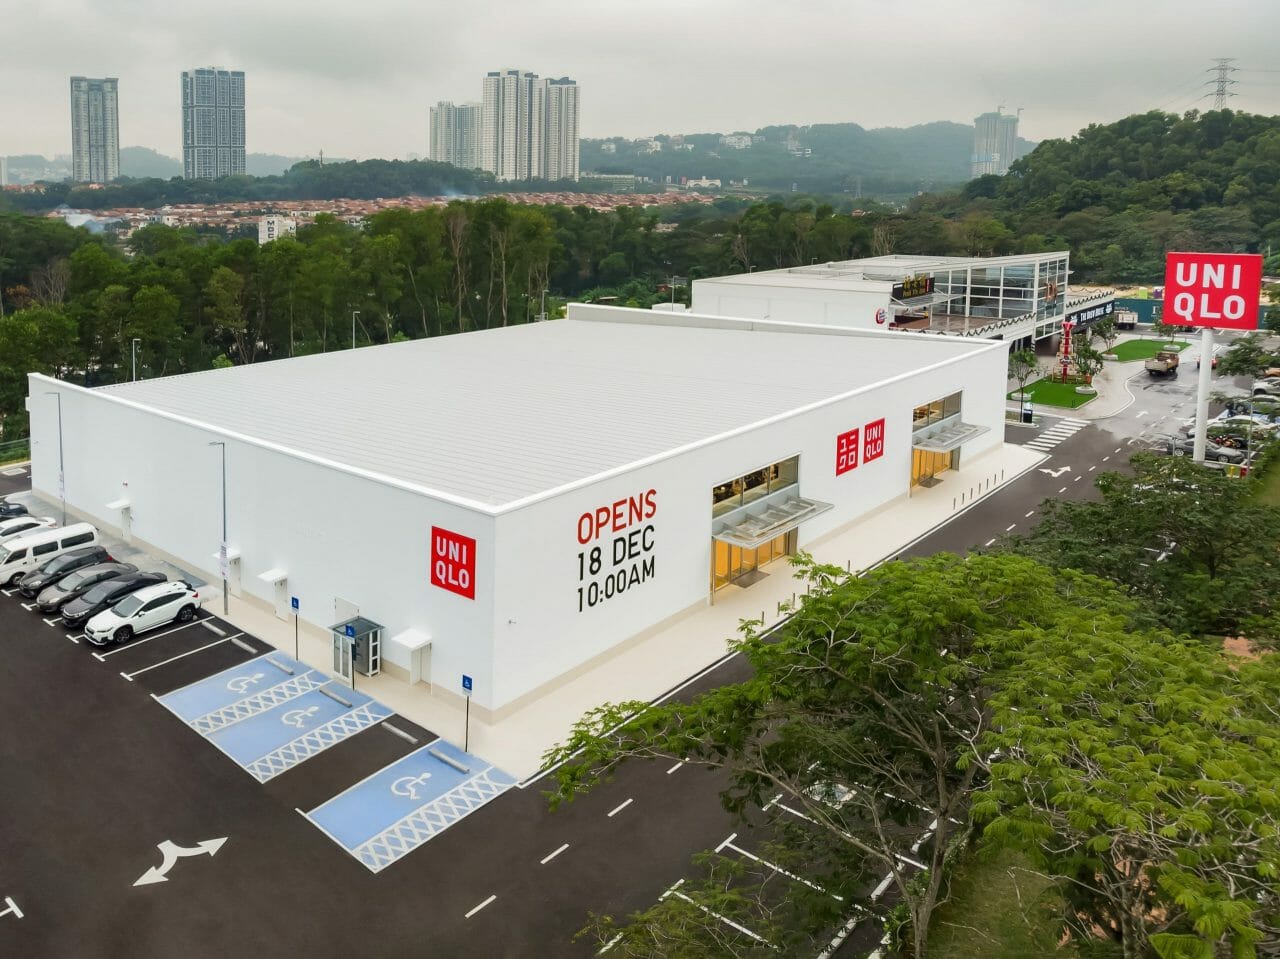 Uniqlo Malaysia opens second store in Johor Bahru  Inside Retail